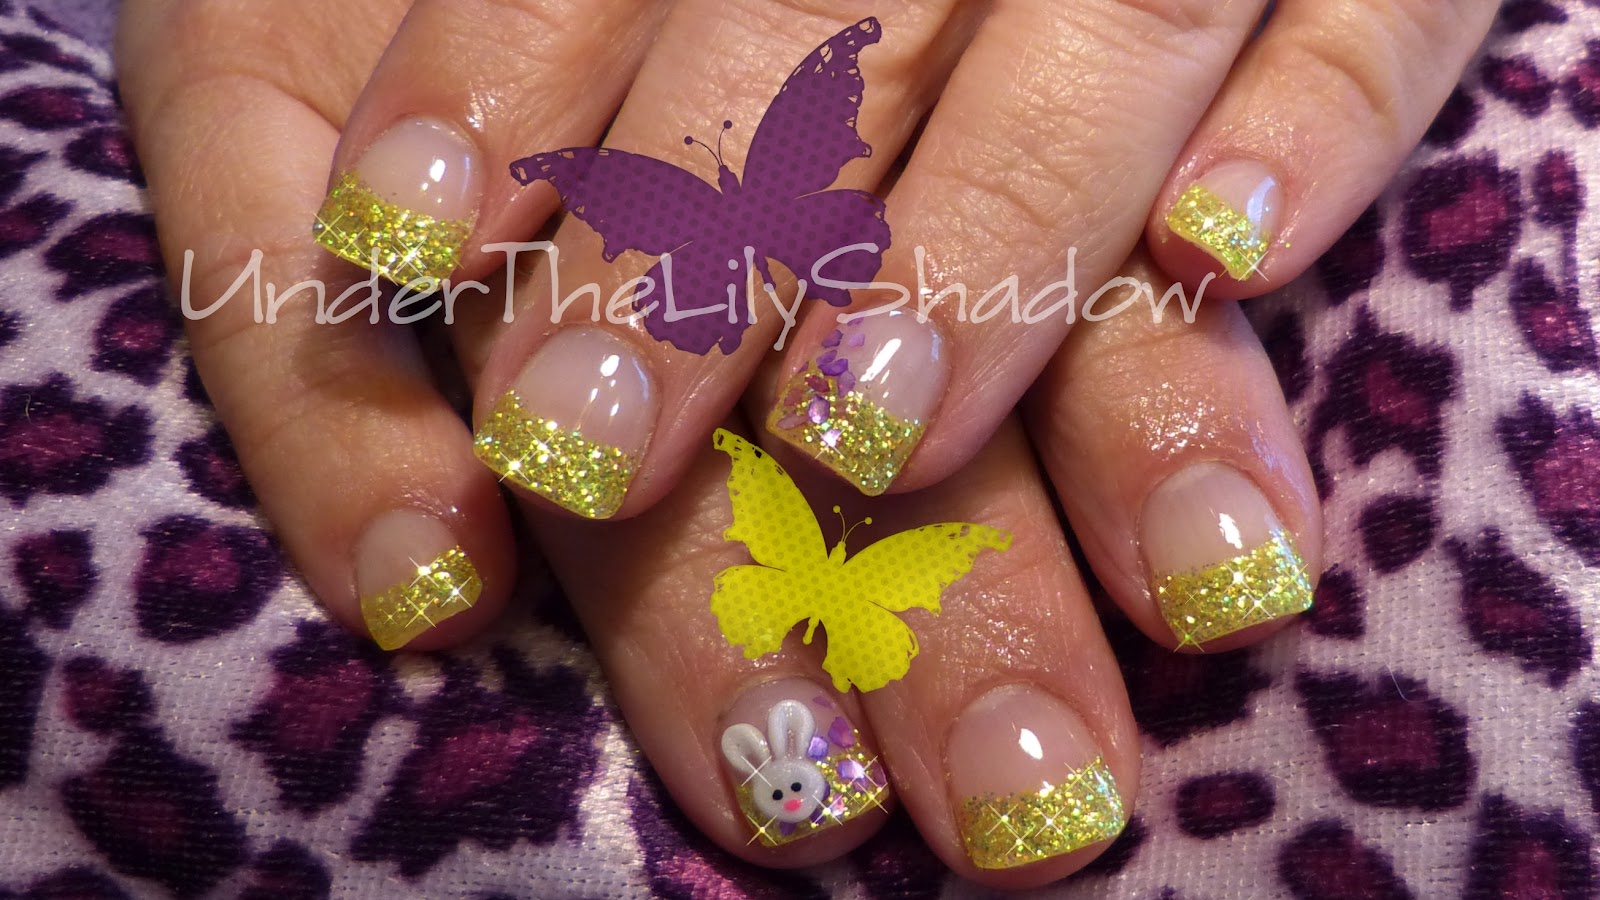 2. Fun and Festive Easter Nail Art - wide 10